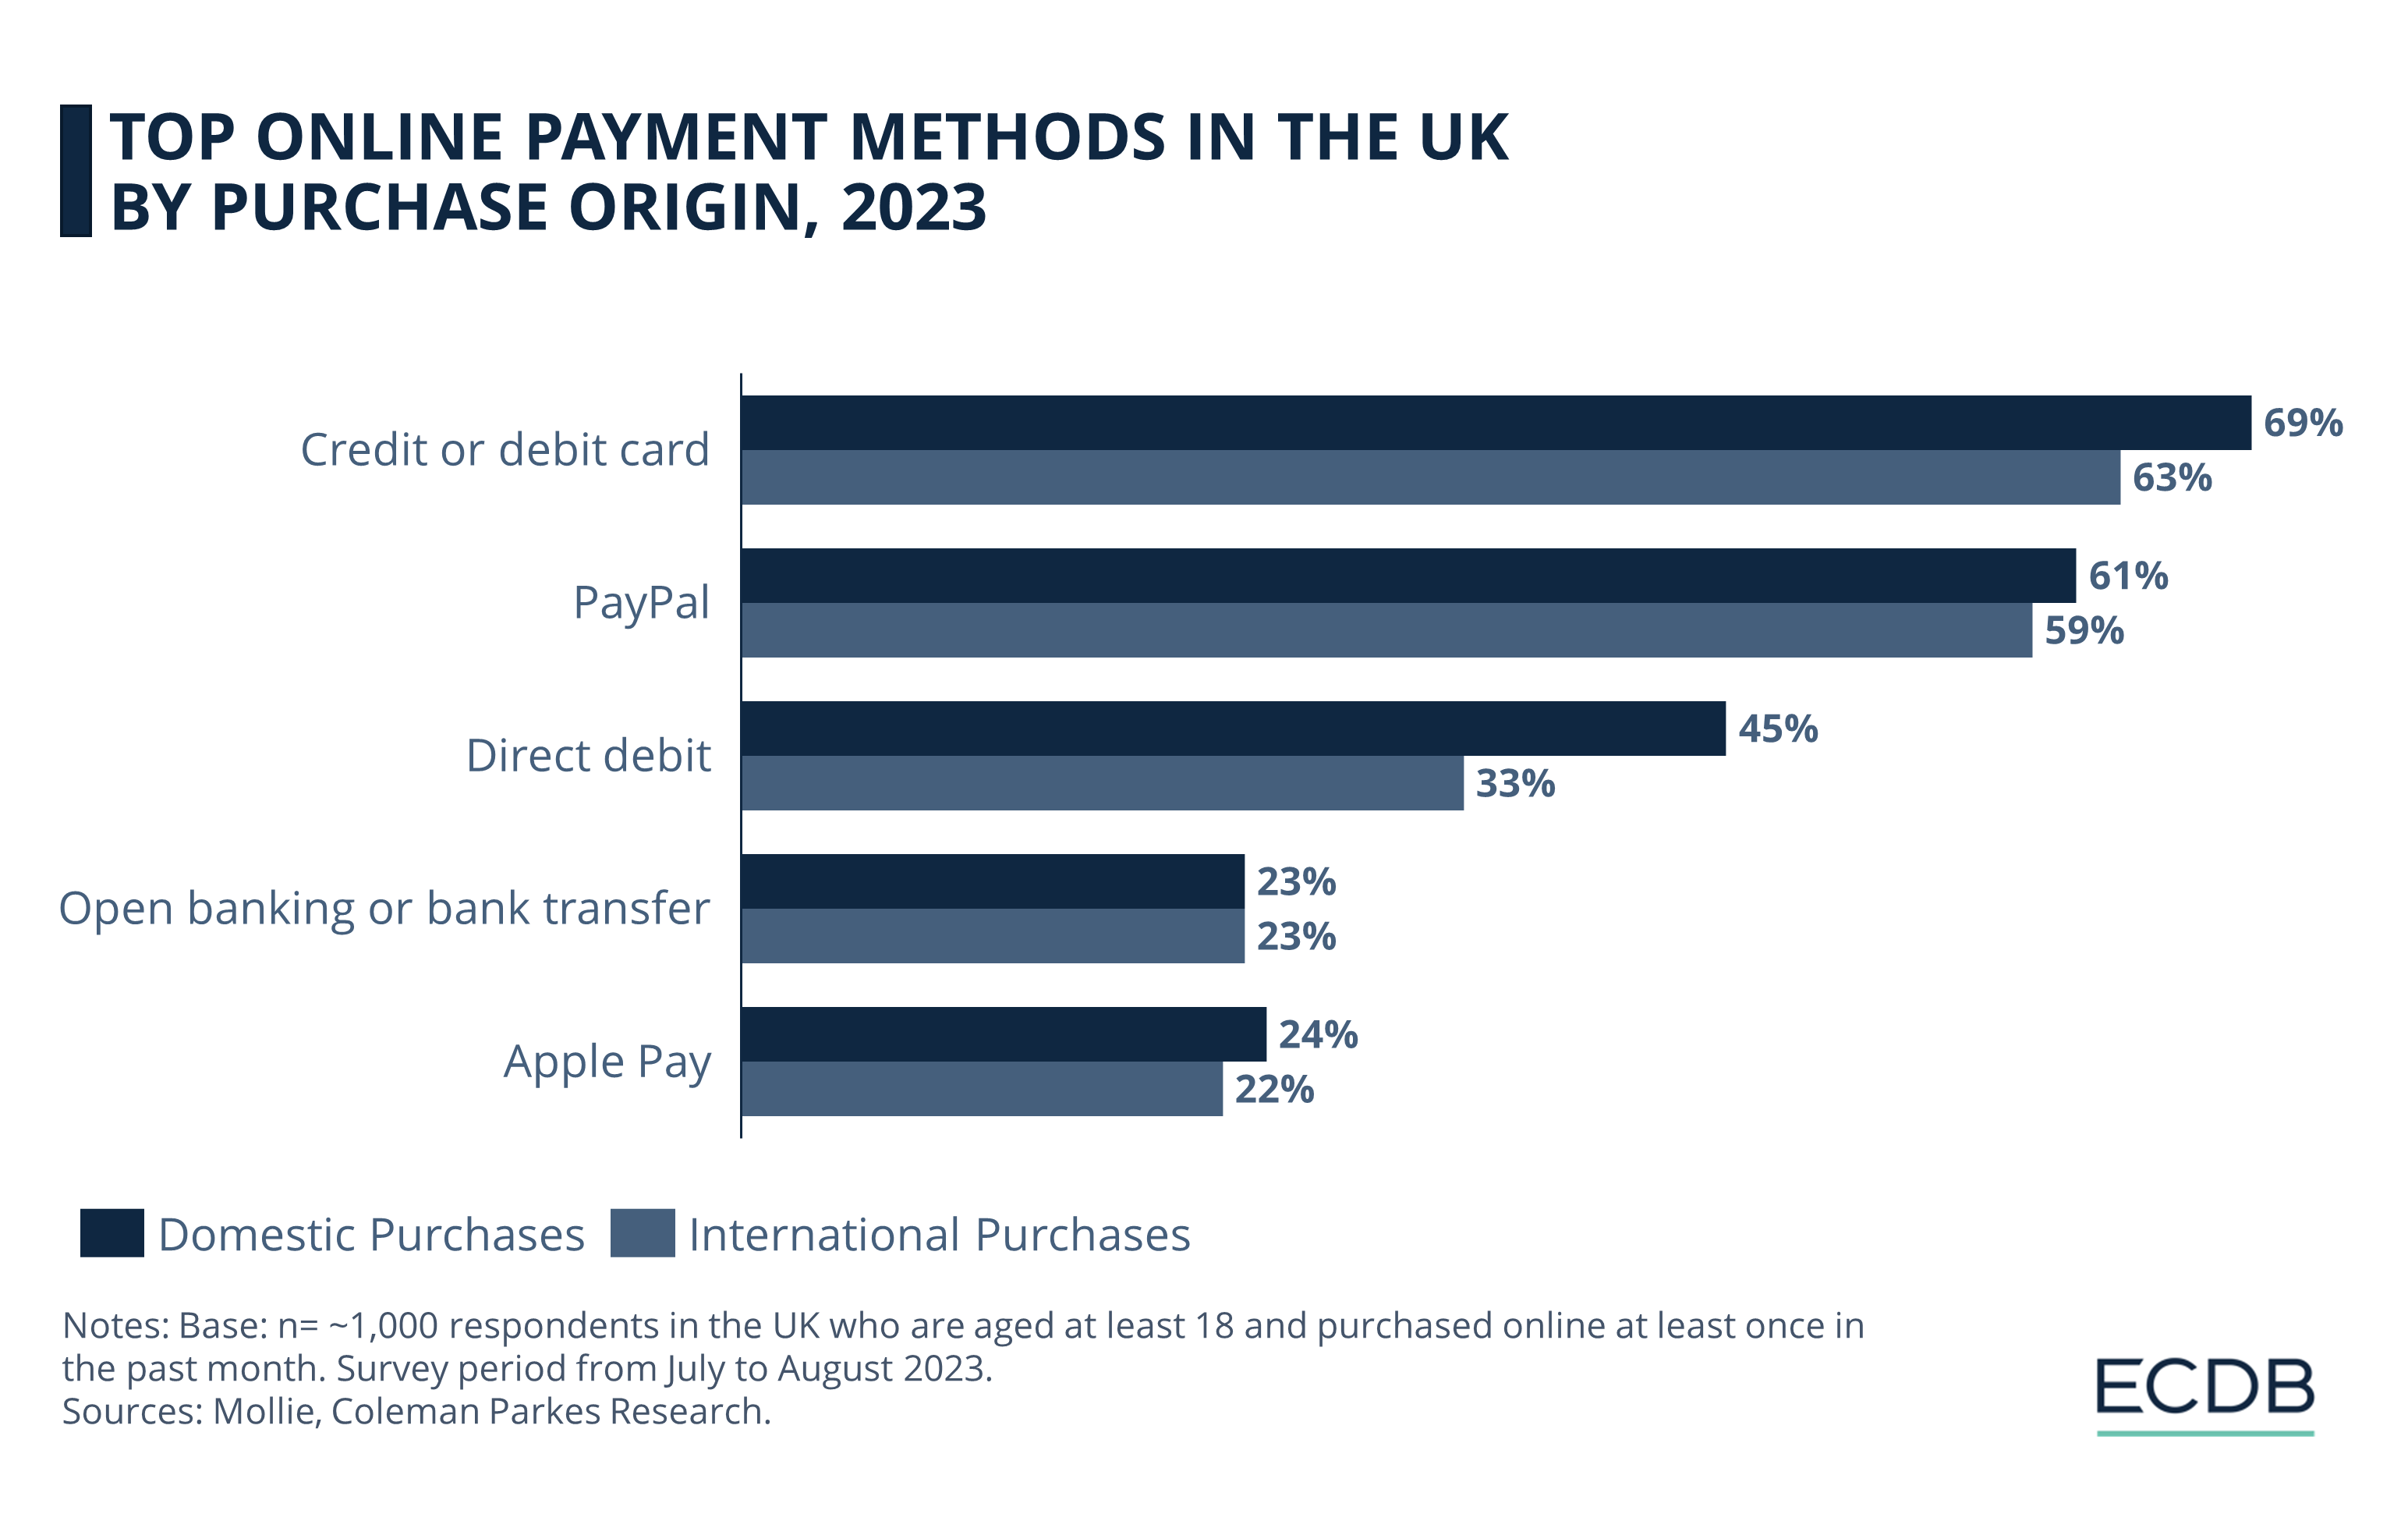 Top Online Payment Methods in the UK by Purchase Origin, 2023